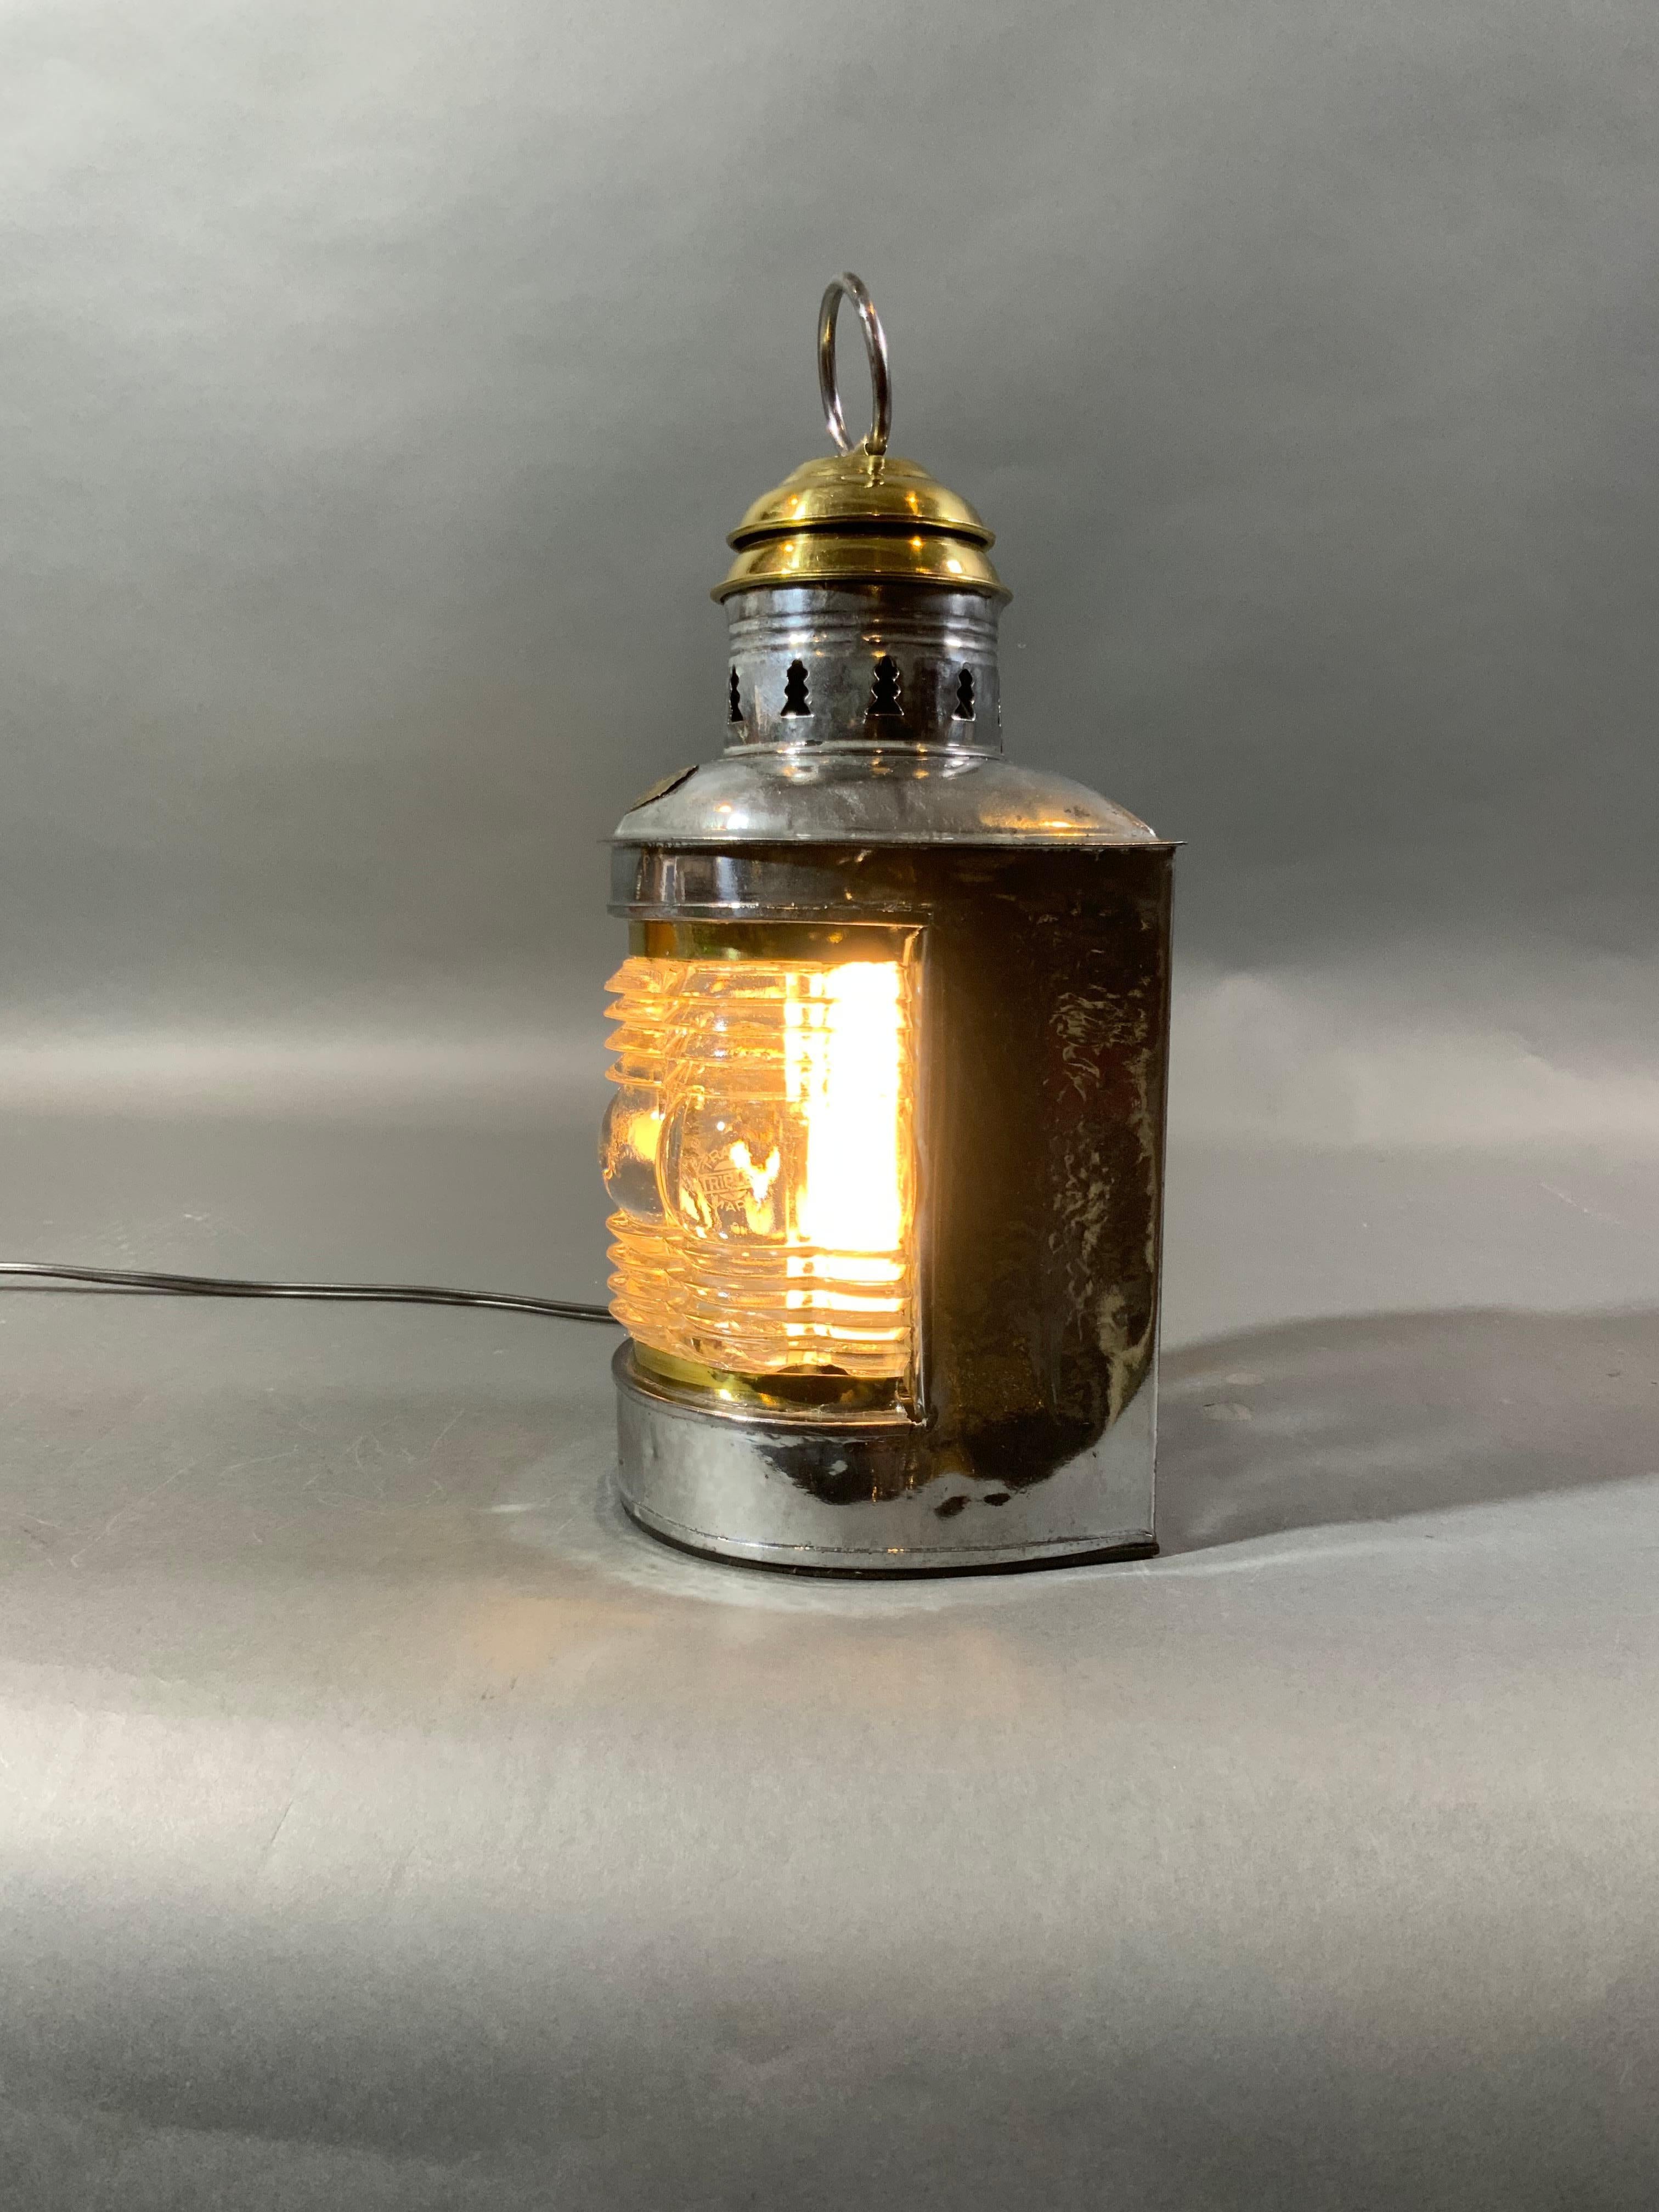 Nice masthead lantern by Triplex. Polished steel case with vented brass top. Lantern has the rare rippled Fresnel glass lens. Unit has been electrified for home use. Lantern has been lacquered. Weight is 3 pounds. Dimensions are 11 tall by 5 by 5.